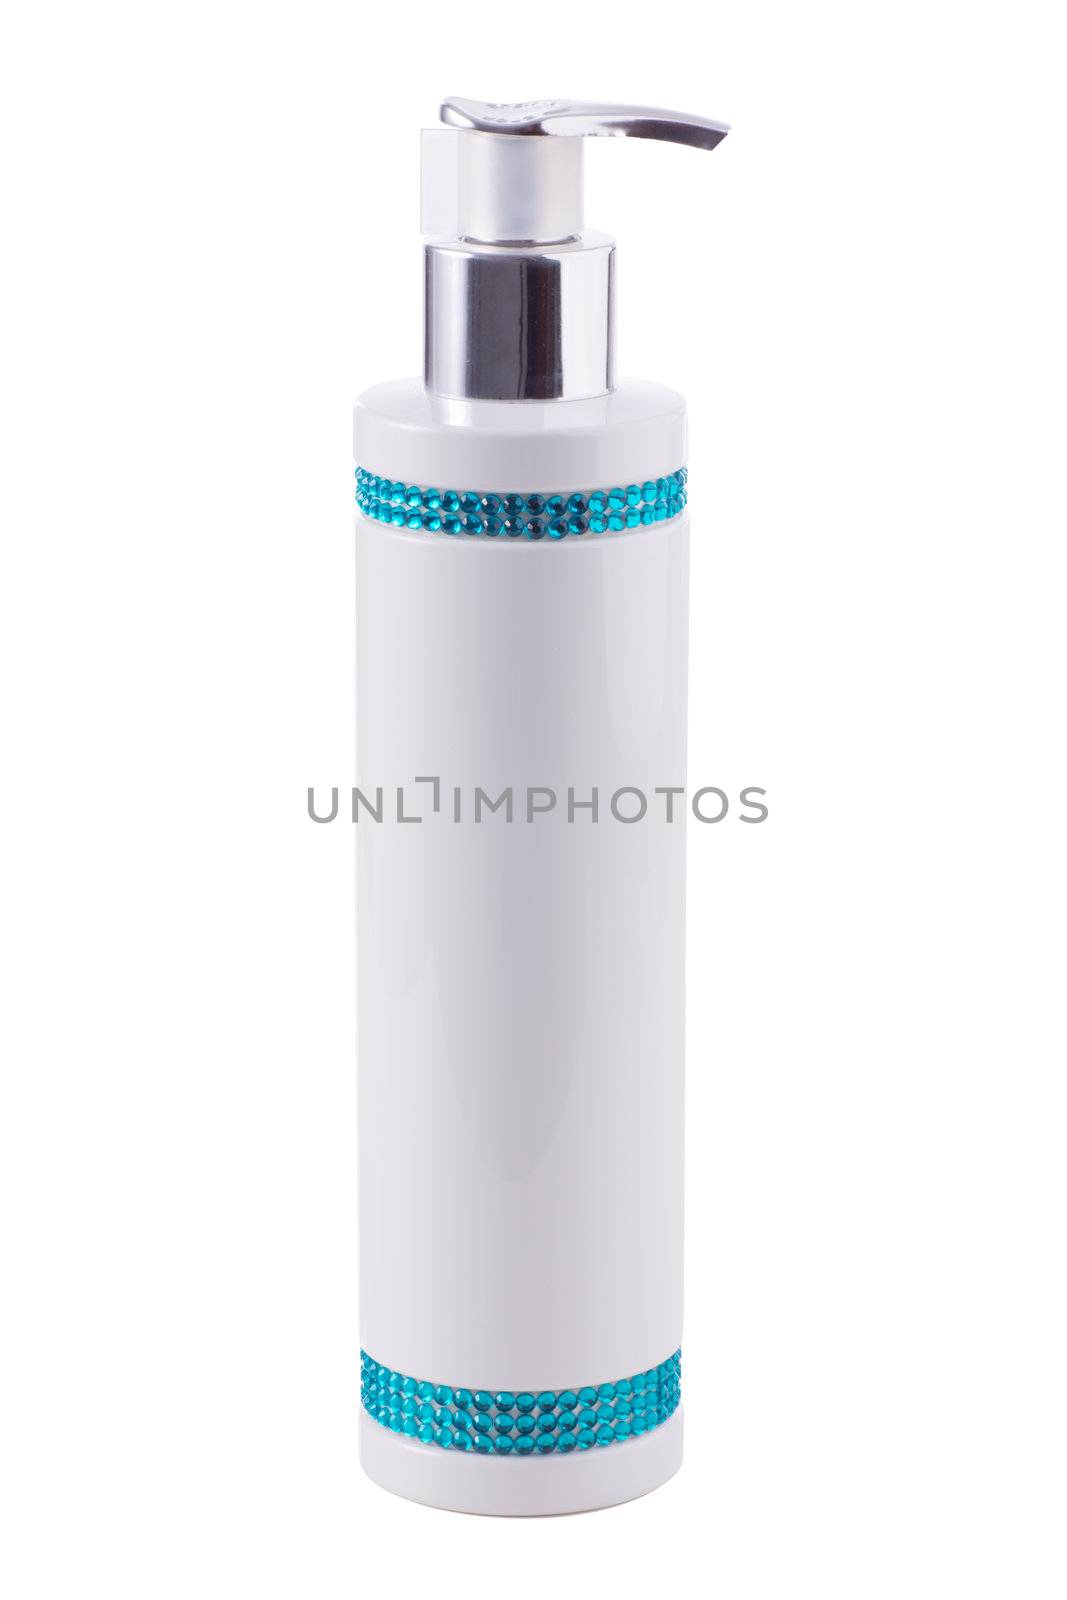 Standing lotion bottle with blue crystals on white background